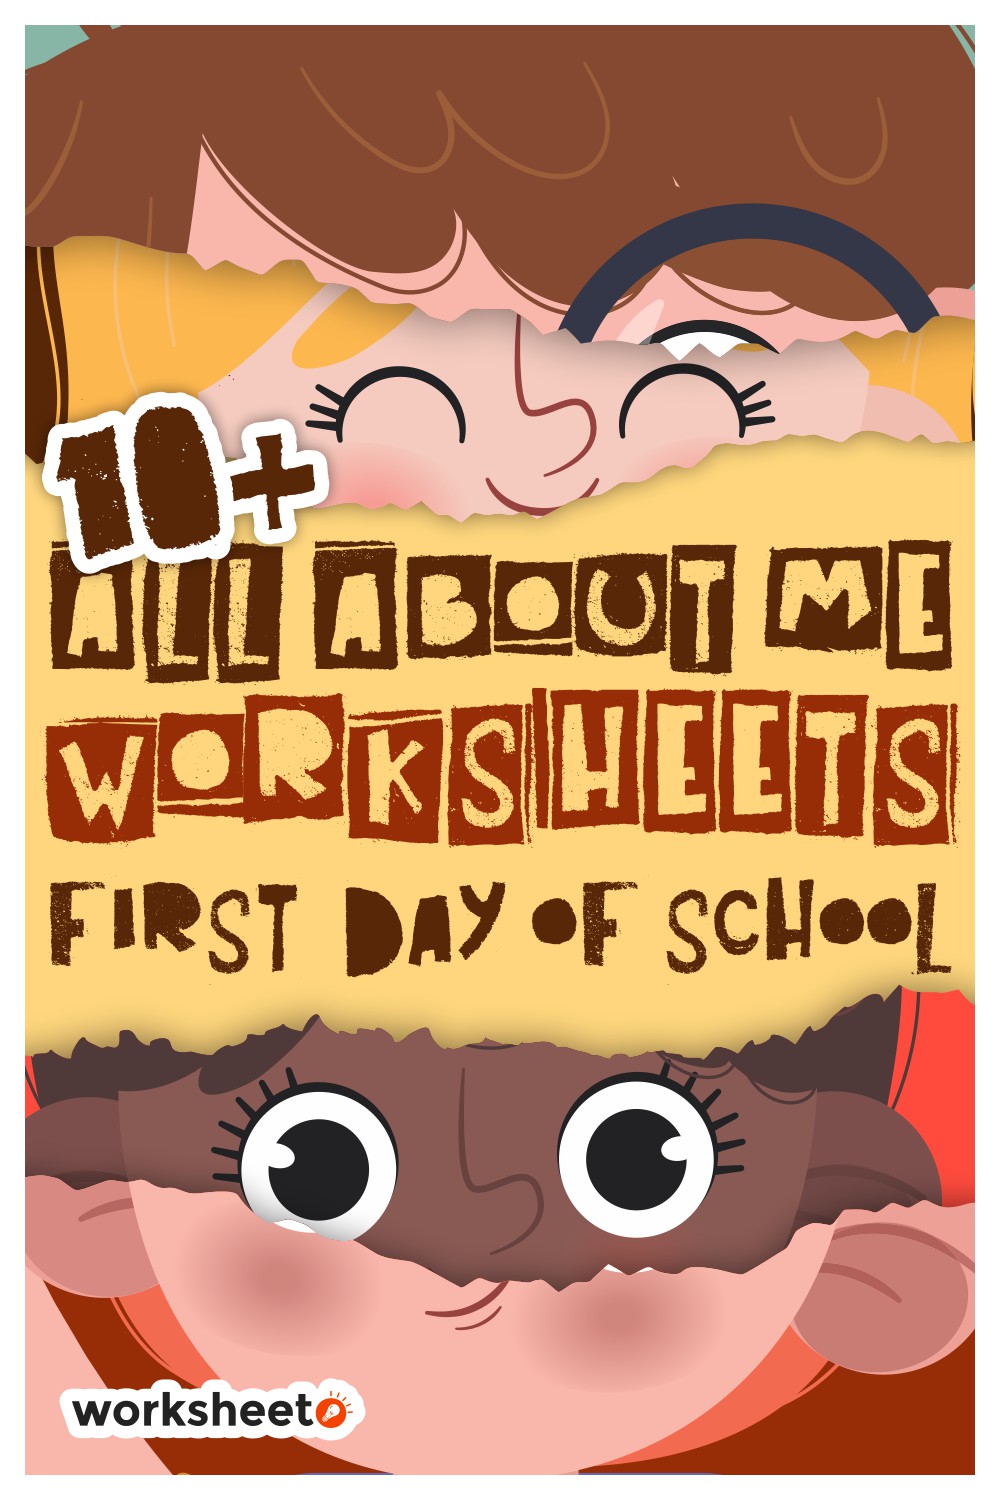 All About Me Worksheets First Day of School